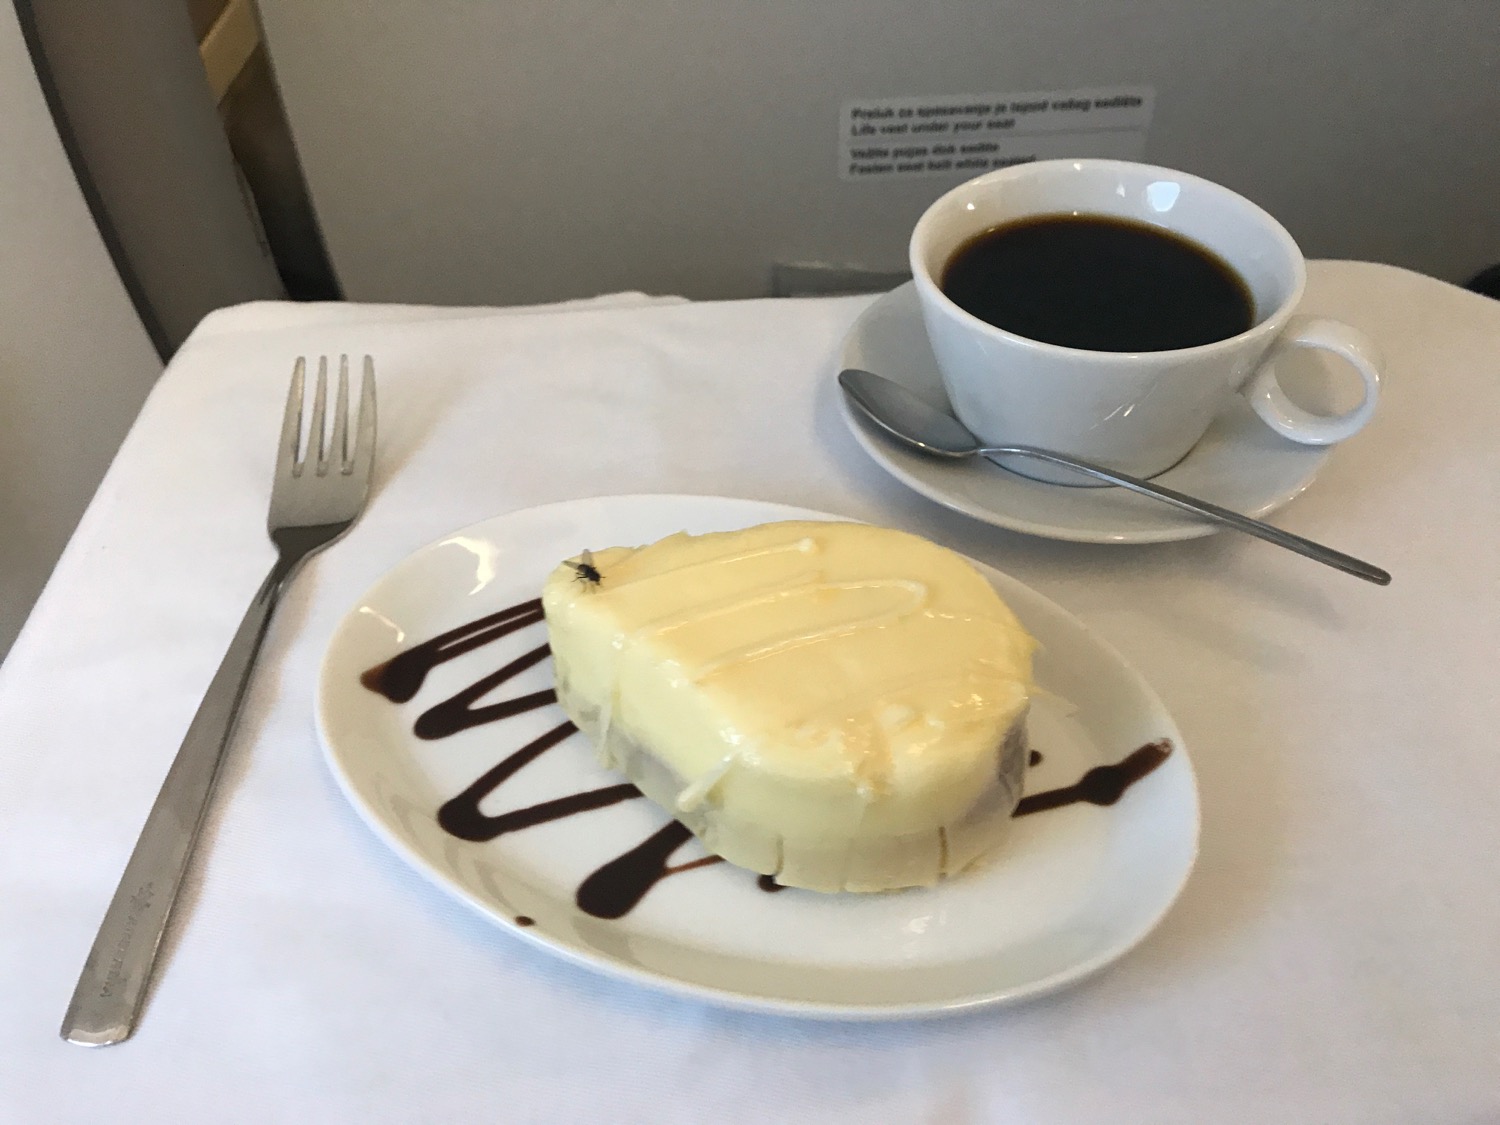 a plate of dessert and a cup of coffee